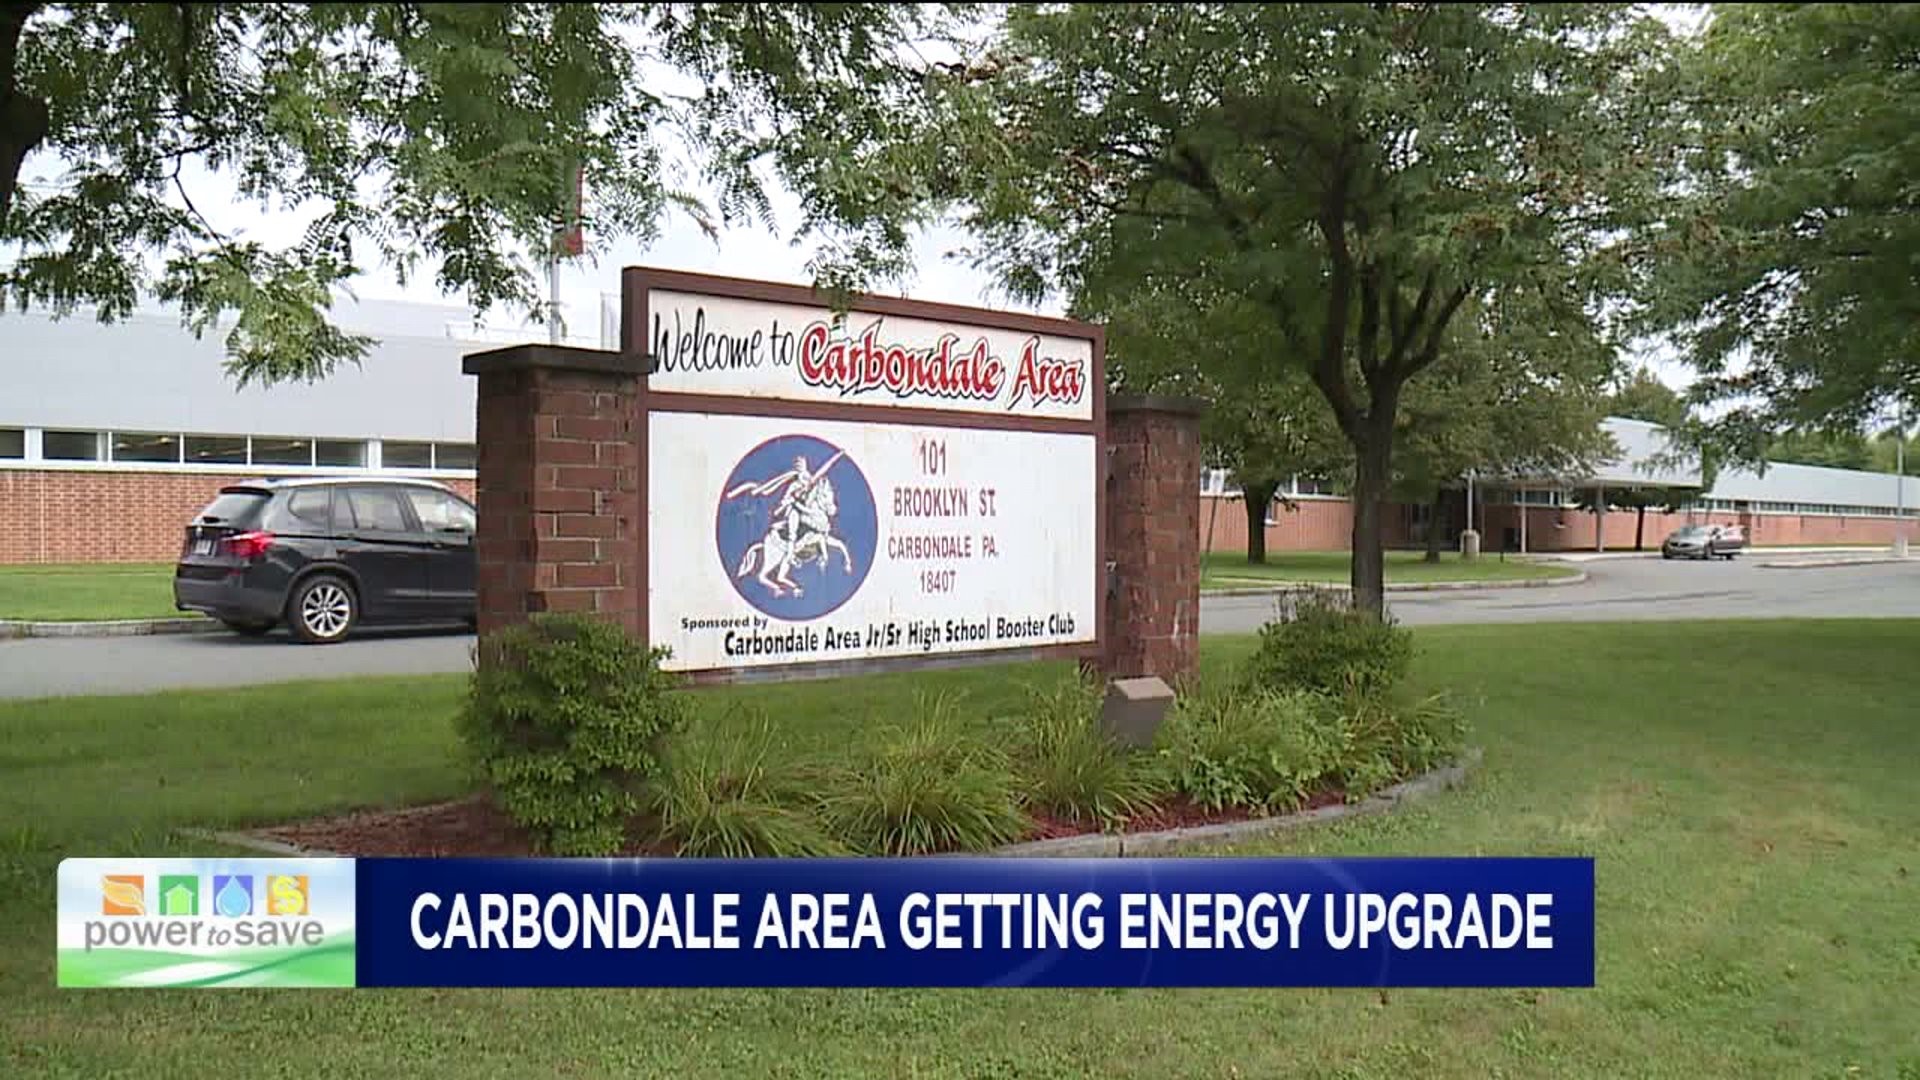 Power To Save: Carbondale Area Getting an Energy Upgrade